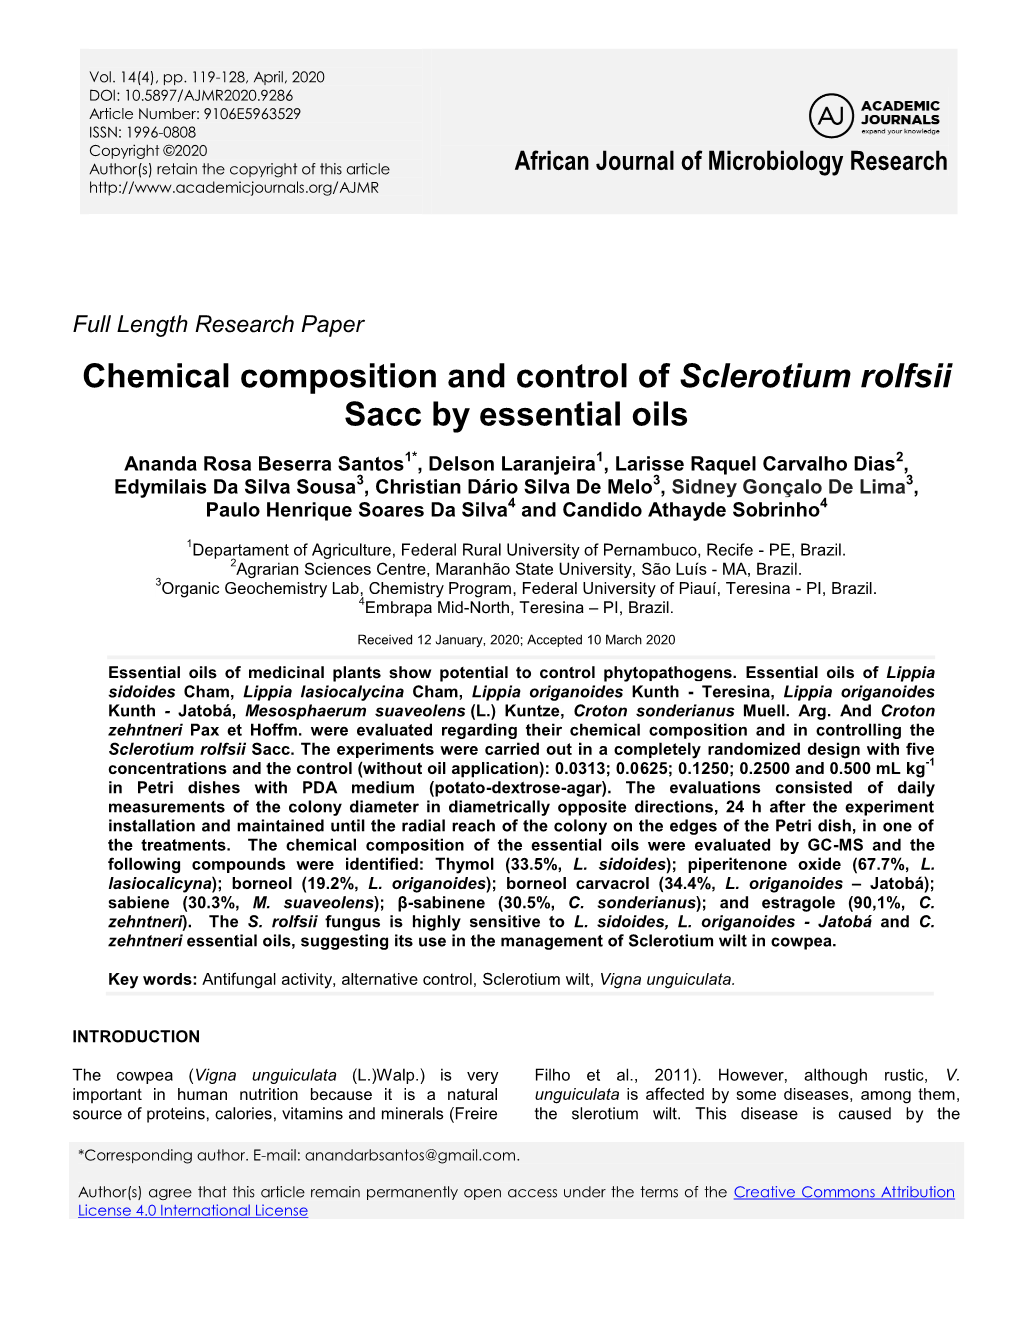 Chemical Composition and Control of Sclerotium Rolfsii Sacc by Essential Oils